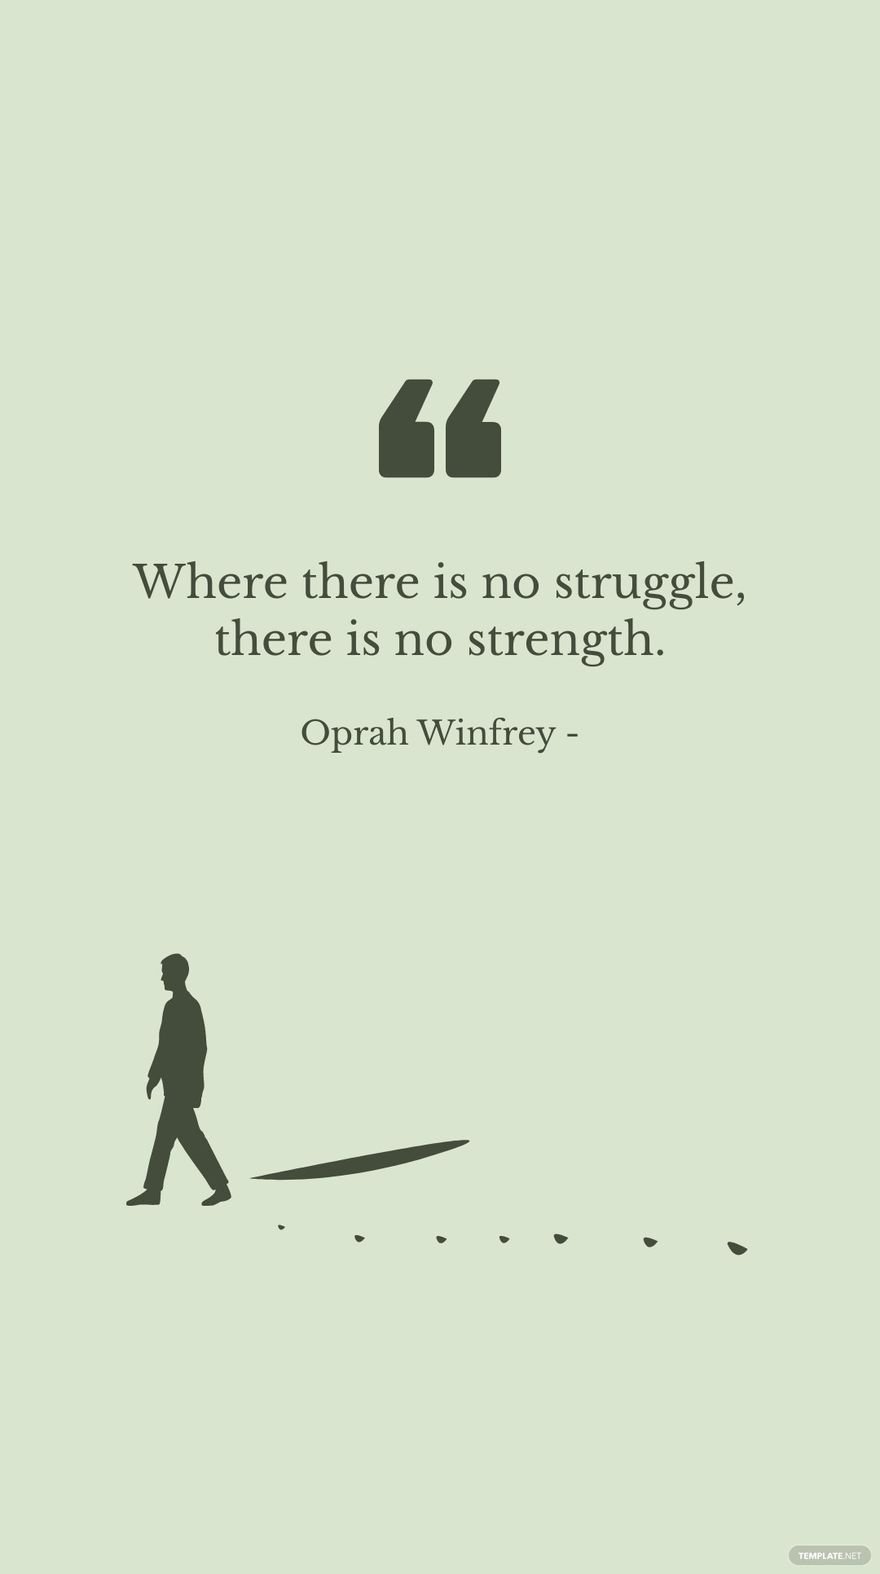 Oprah Winfrey - Where there is no struggle, there is no strength. in JPG